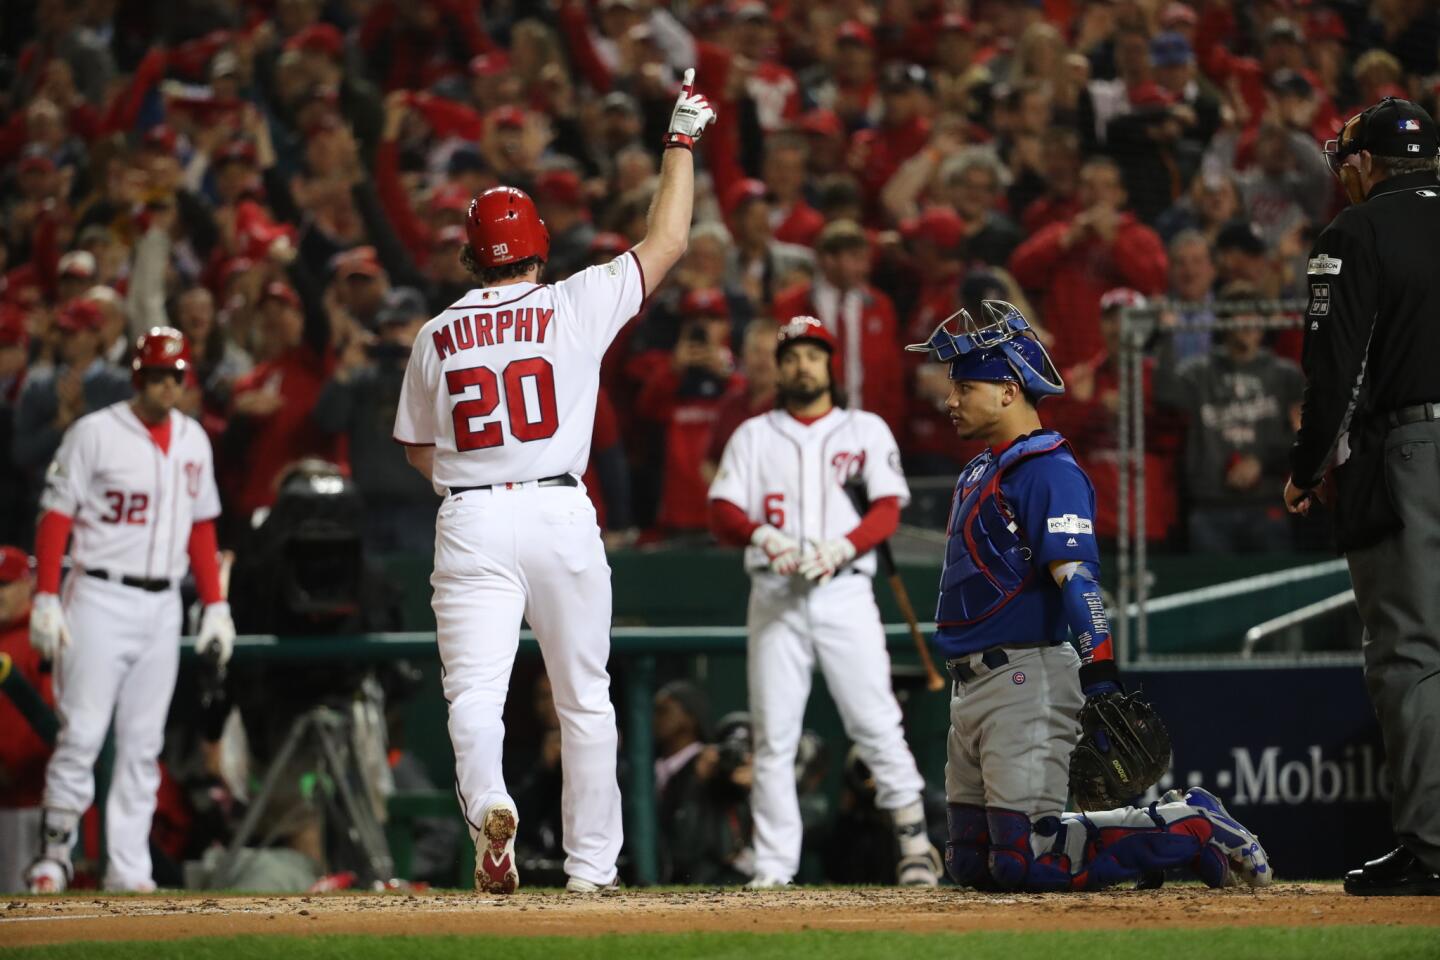 ct-nlds-game-5-cubs-at-nationals-photos-201710-033